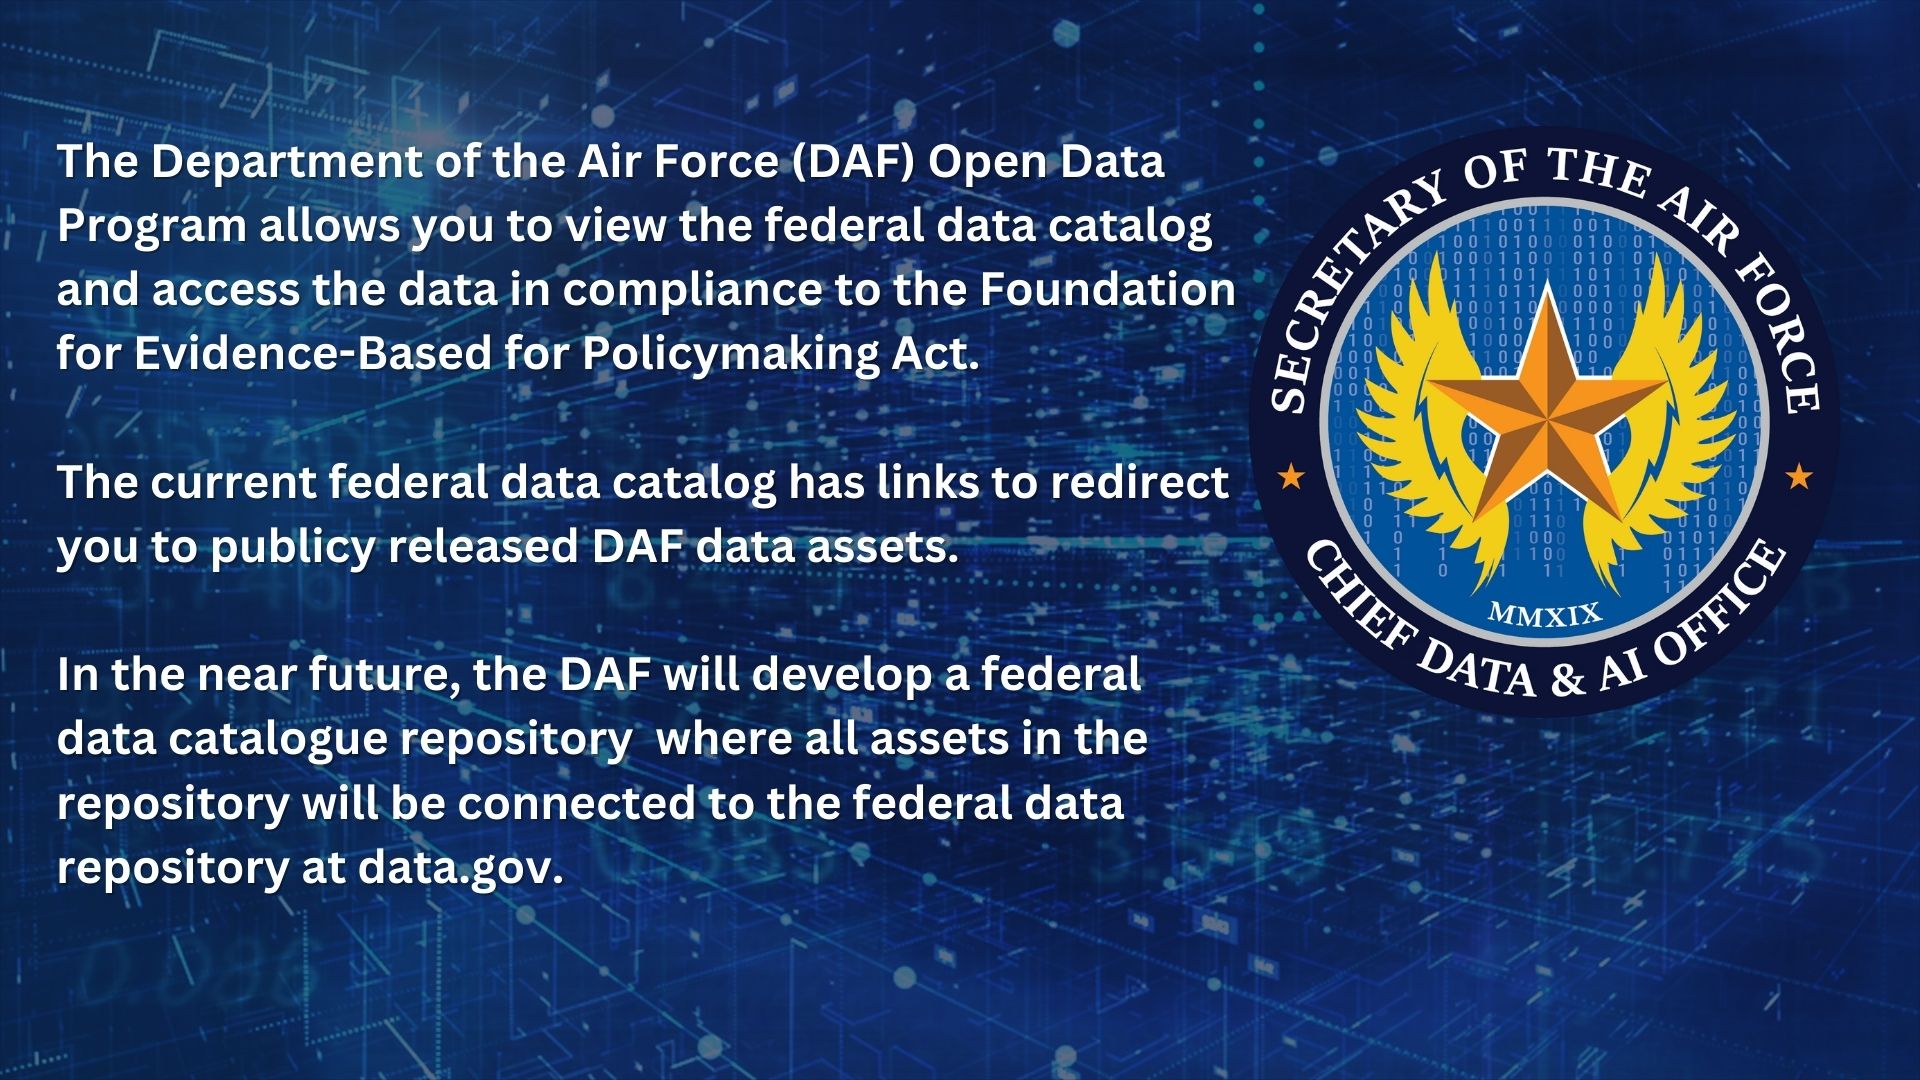 Graphic summarizing the Department of the Air Force Open Data Program